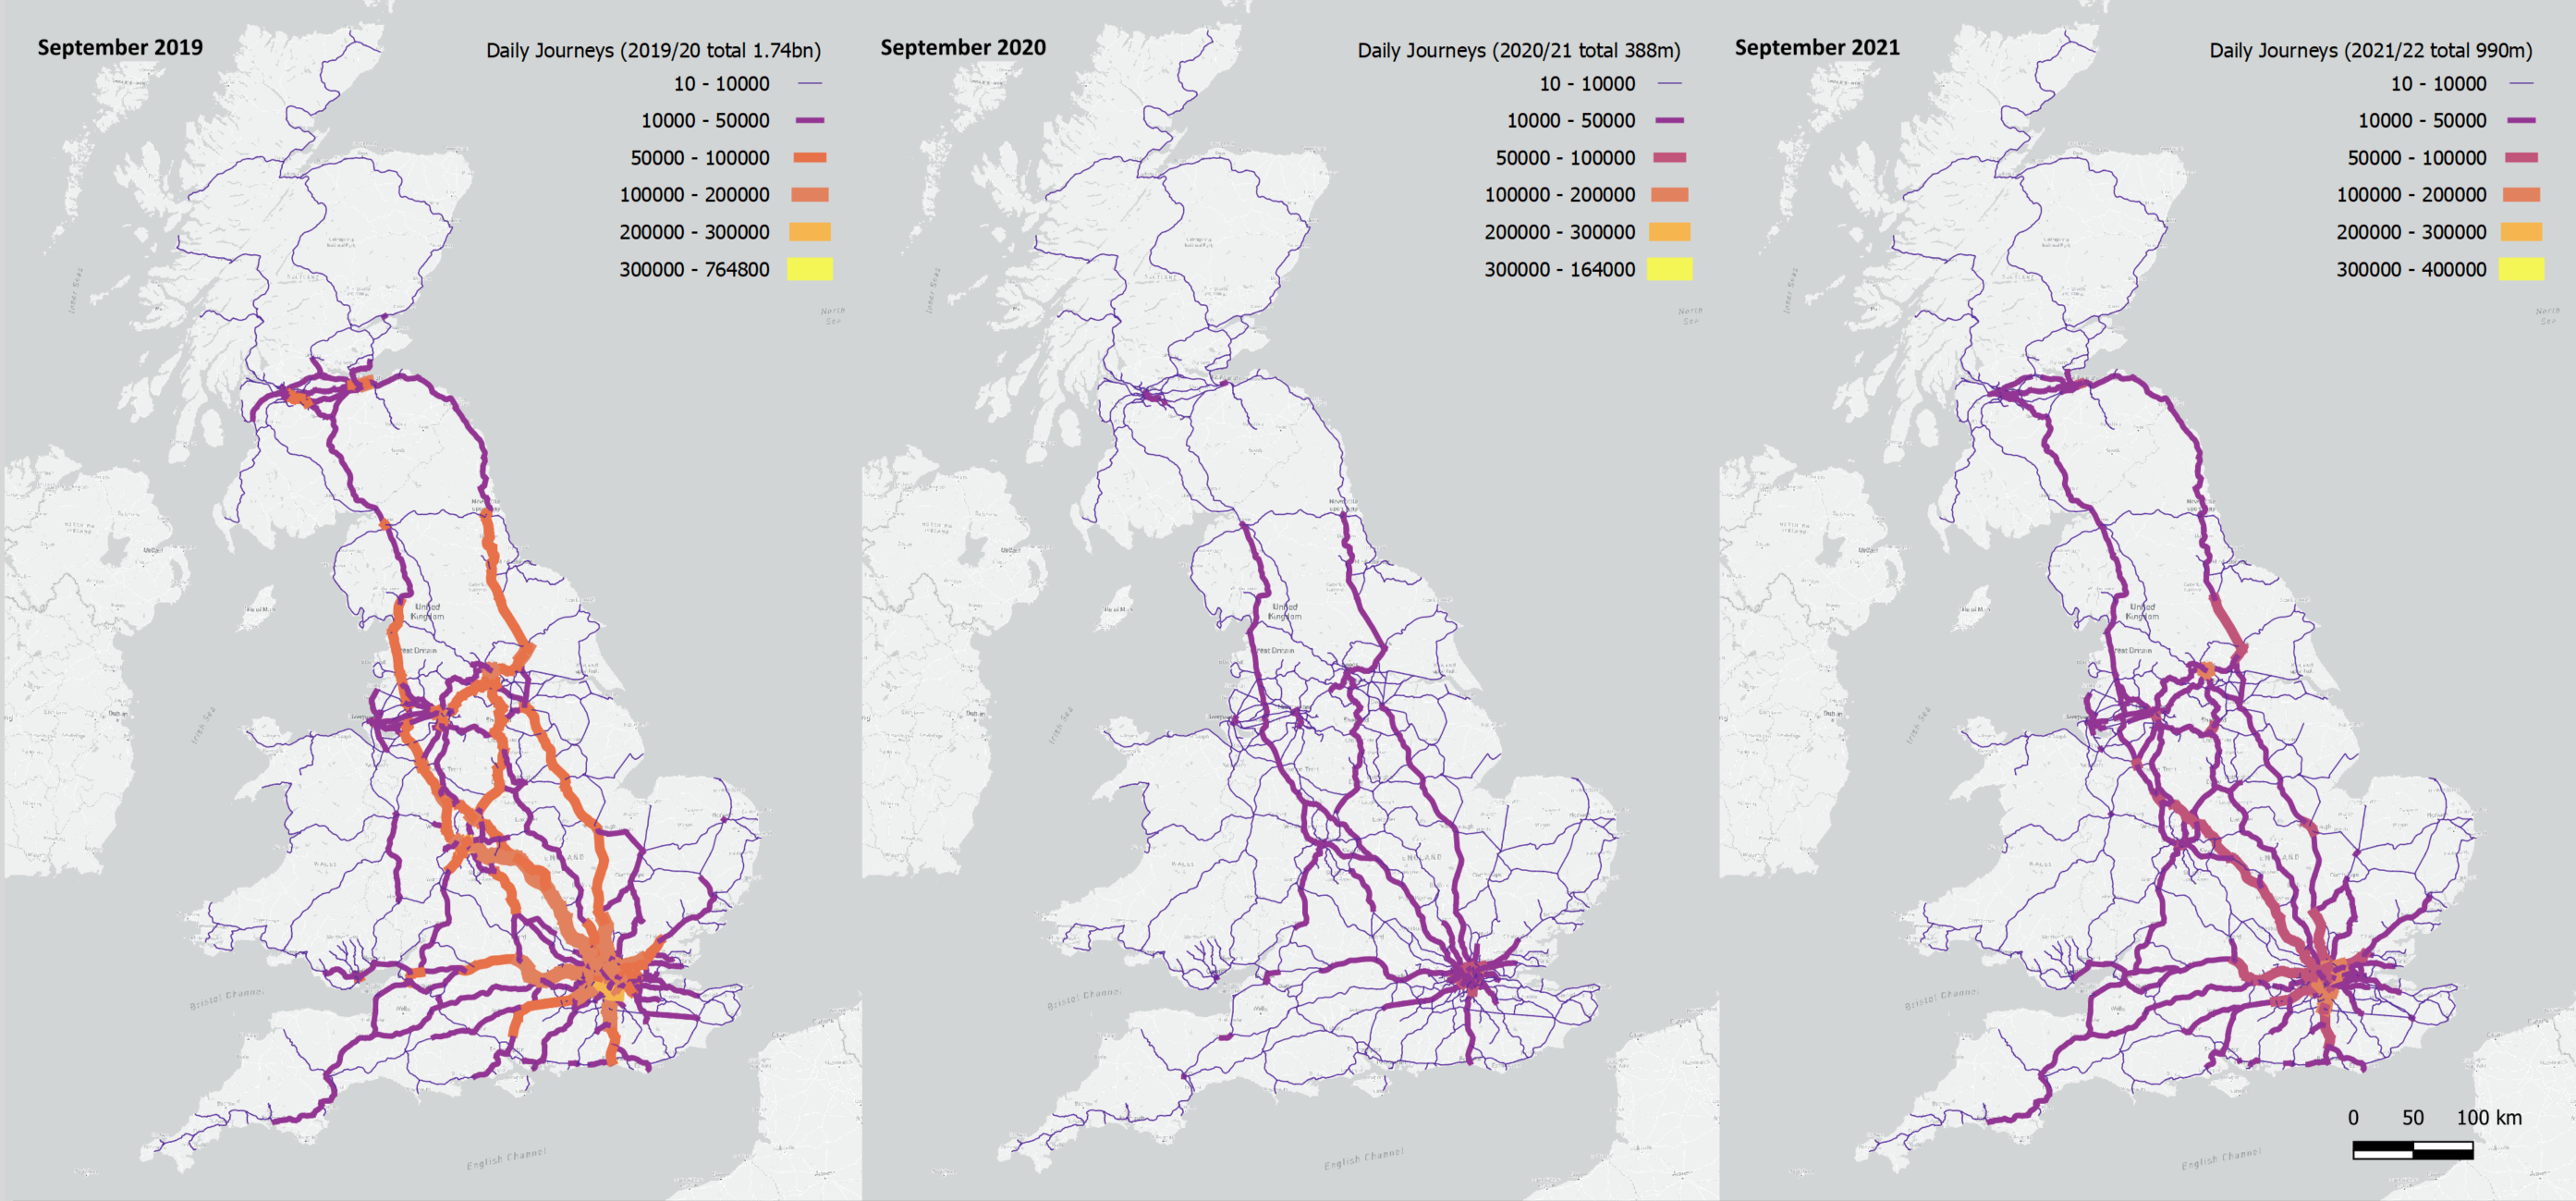 Three side-by-side maps of Great Britain showing the changing nature of passenger journeys by rail route.